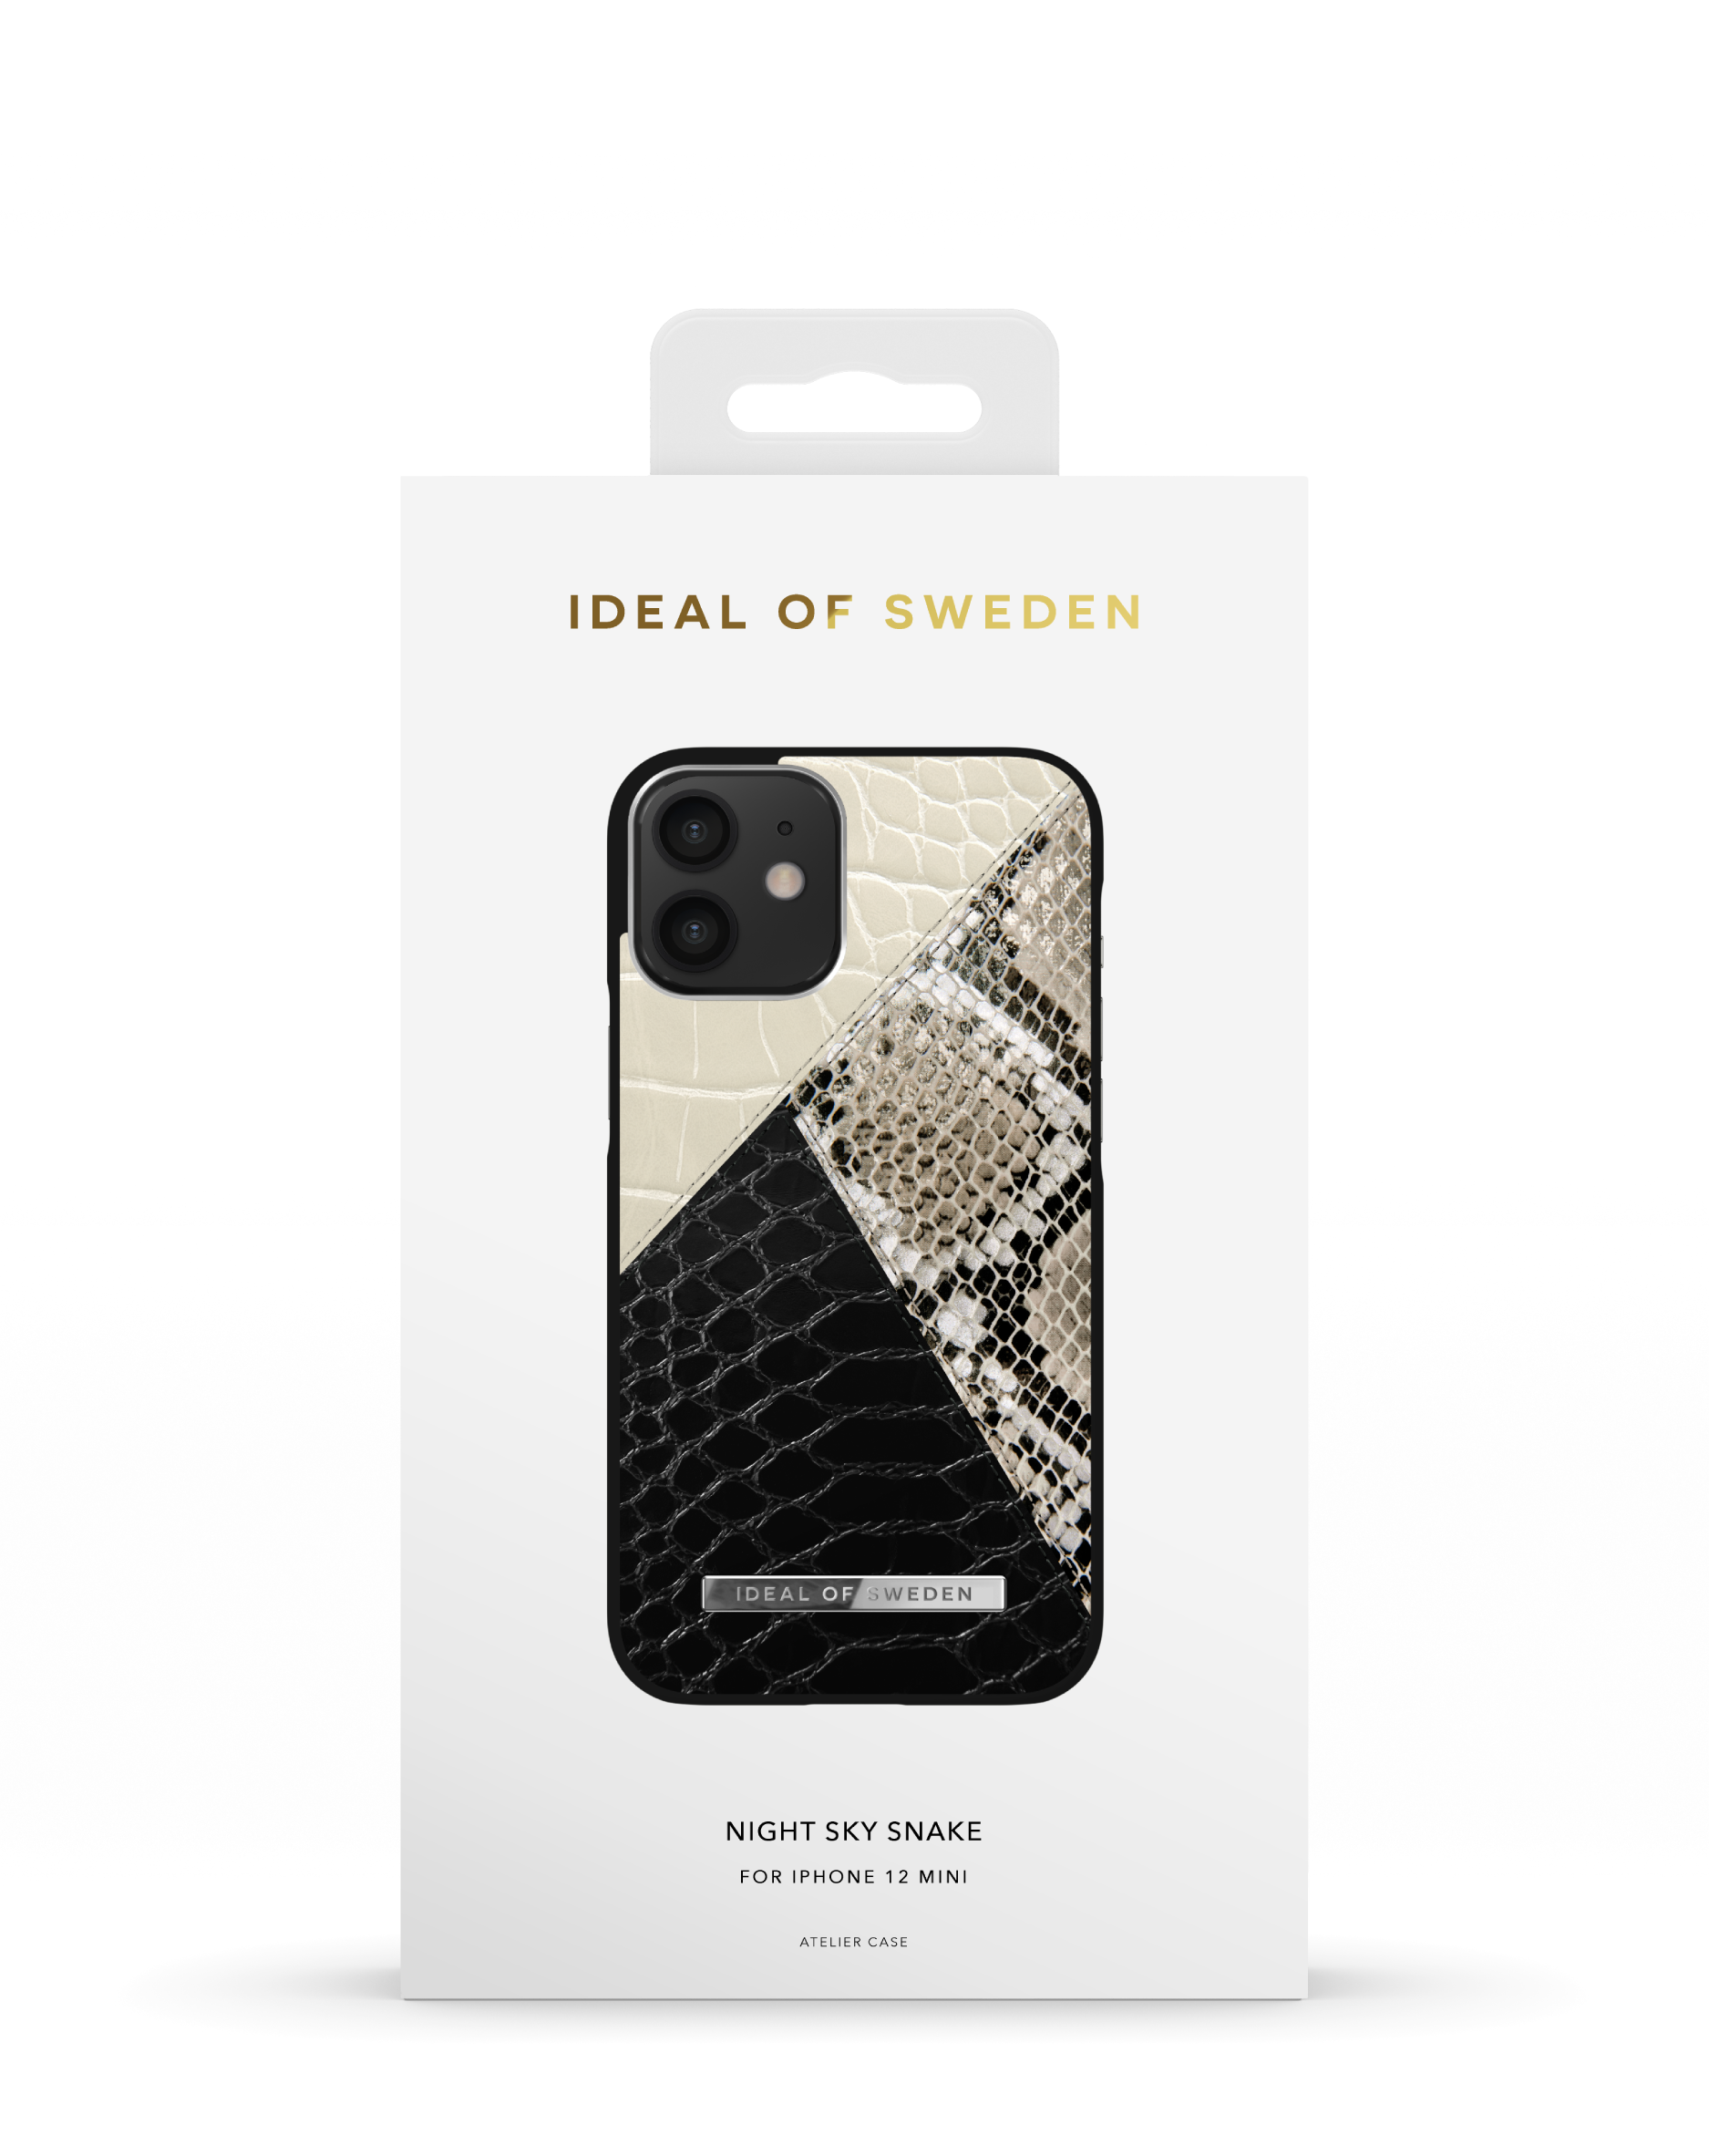 OF Snake IPhone SWEDEN Apple, mini, Sky IDACSS21-I2054-271, Night IDEAL Backcover, 12